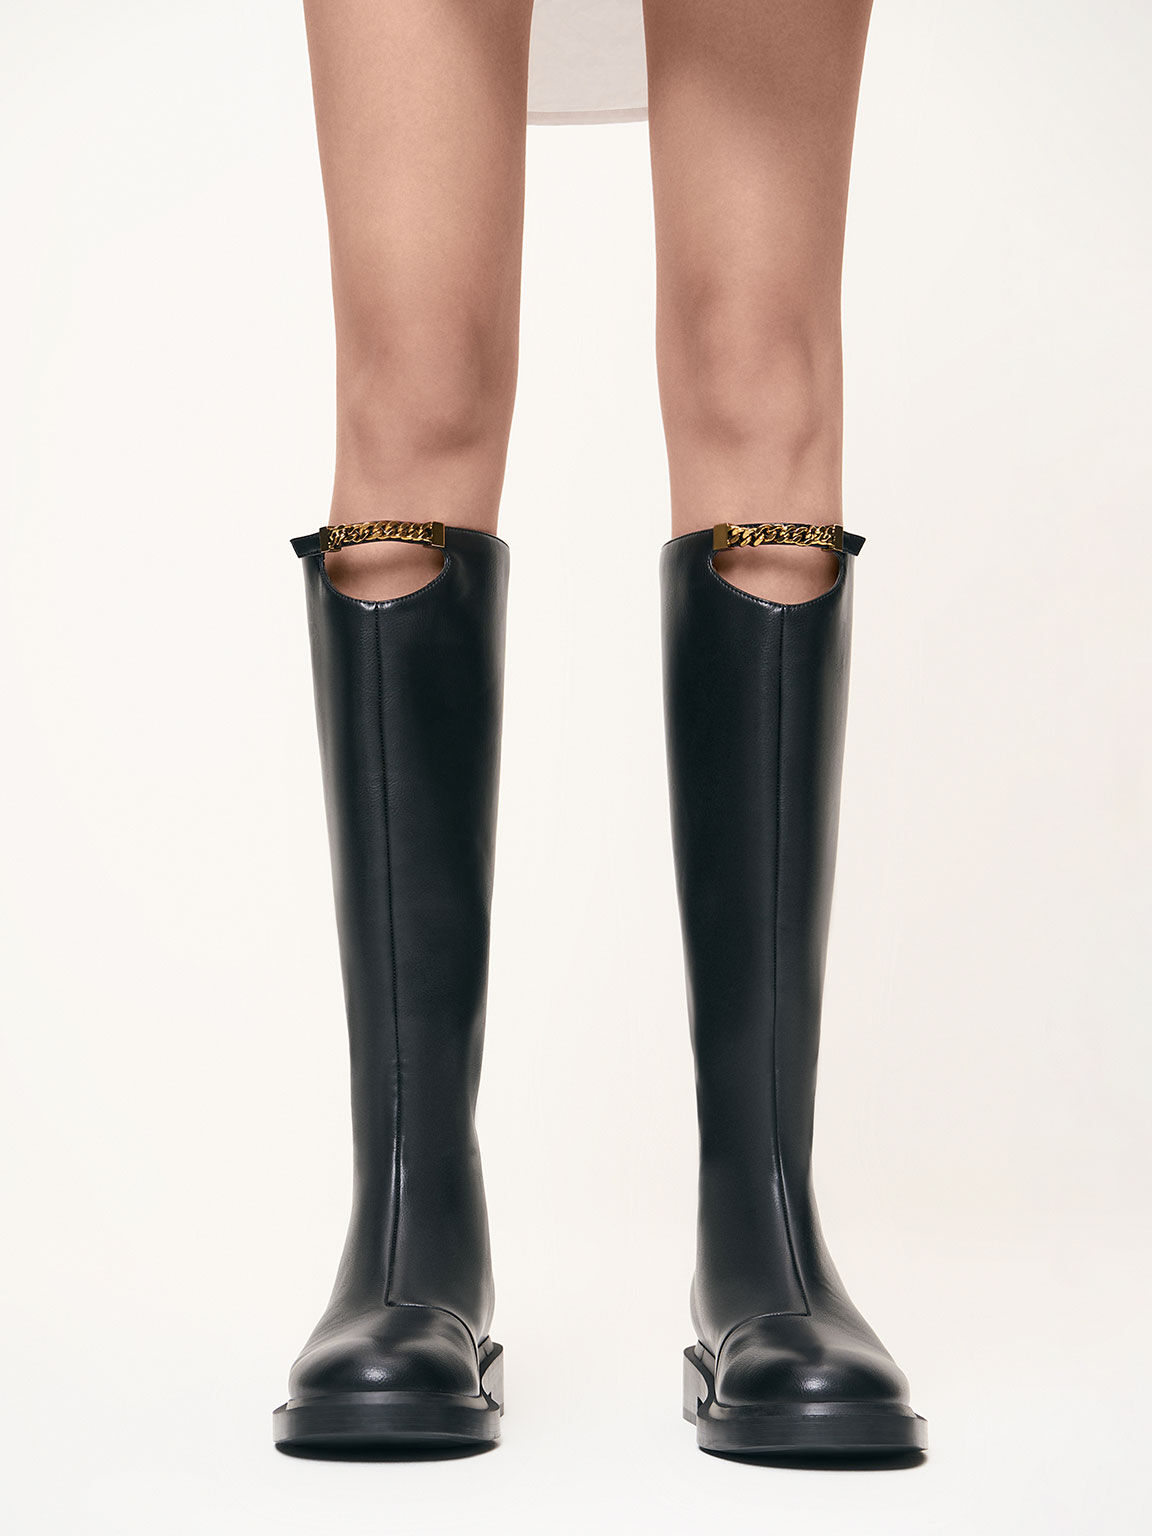 Chain-Link Cut-Out Knee-High Boots, Black, hi-res